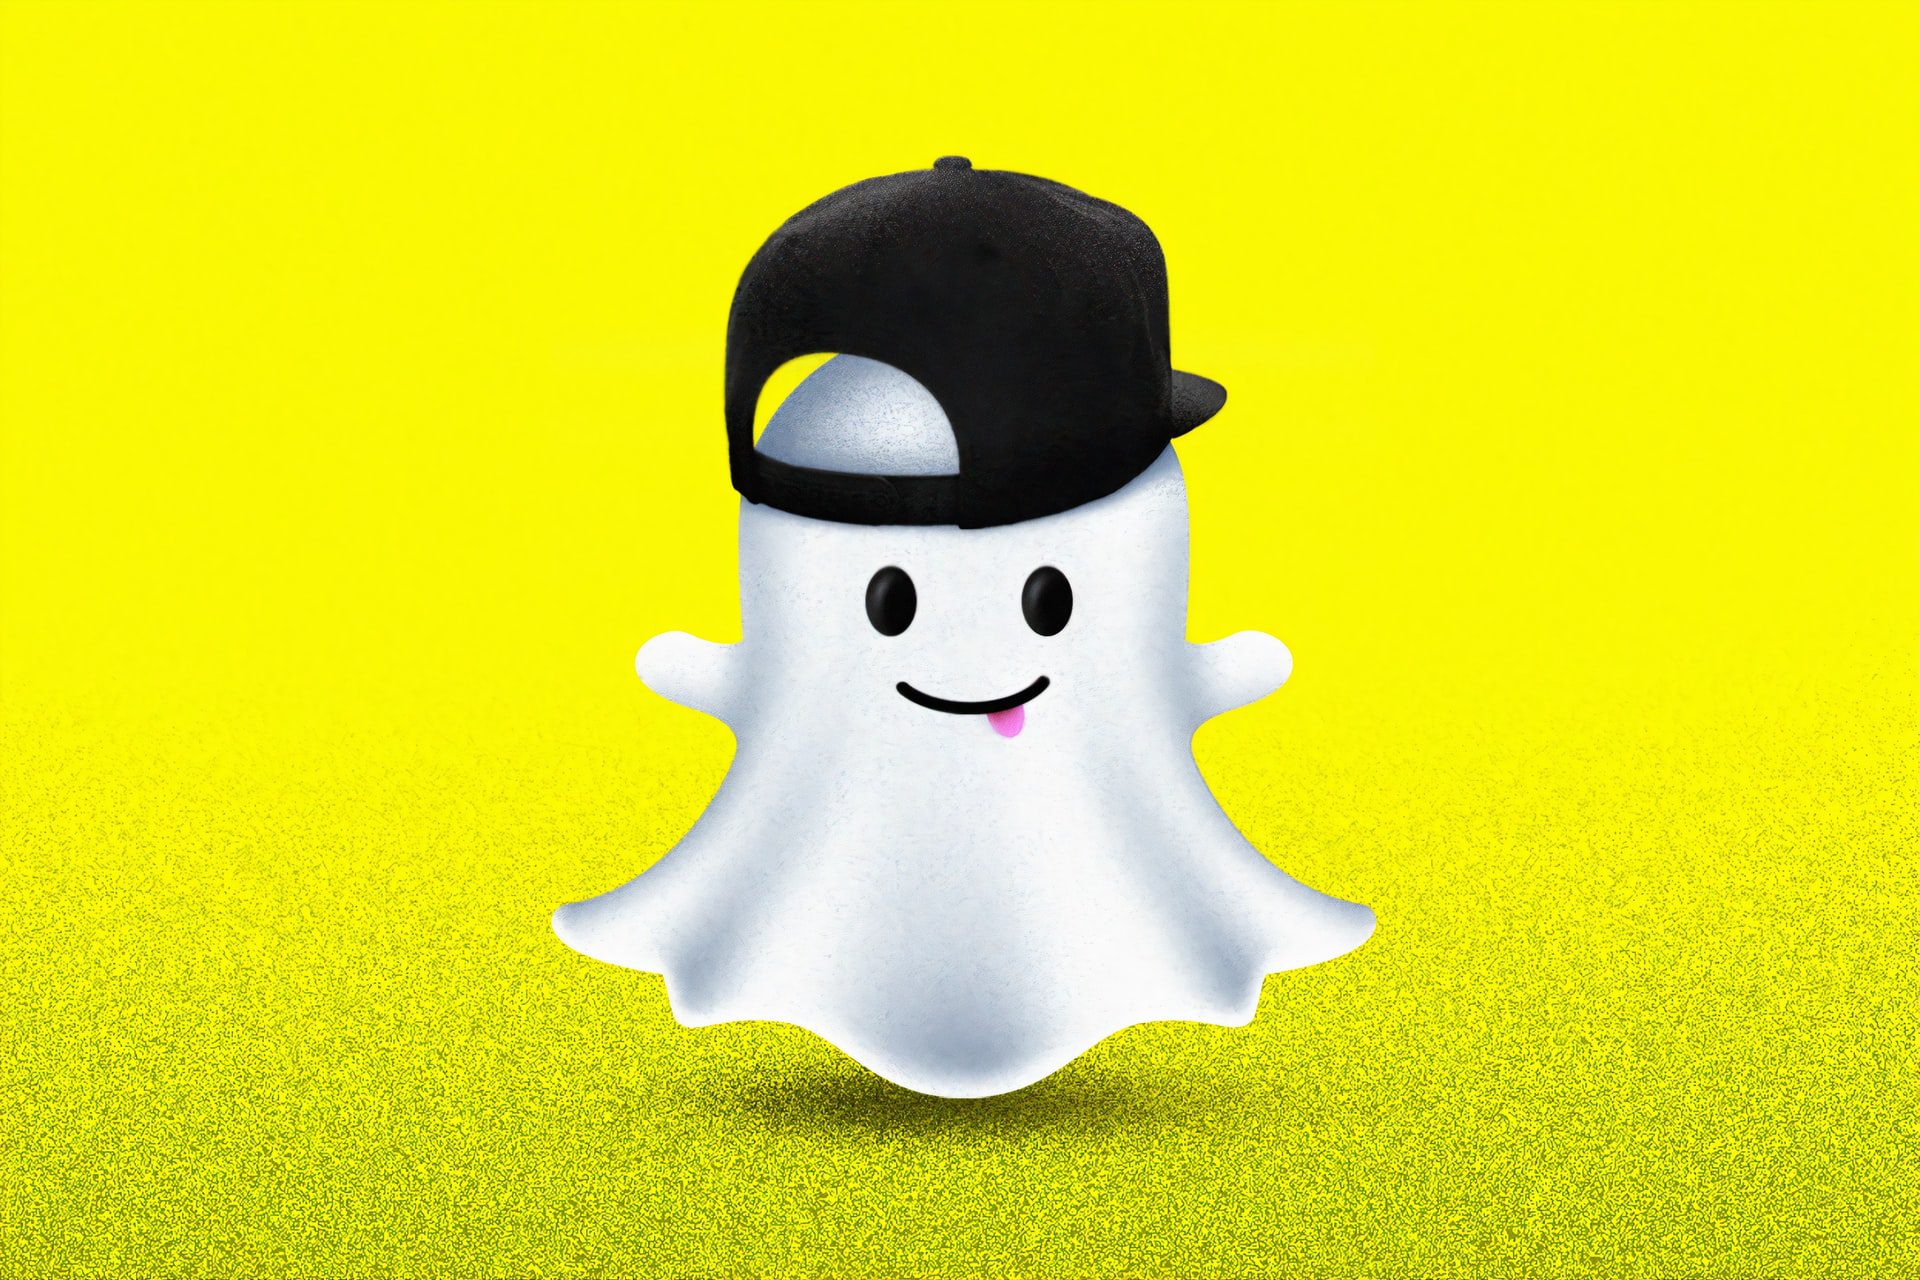 A photo of Snapchat ghost wearing a black cap for how to get Snapstreaks back